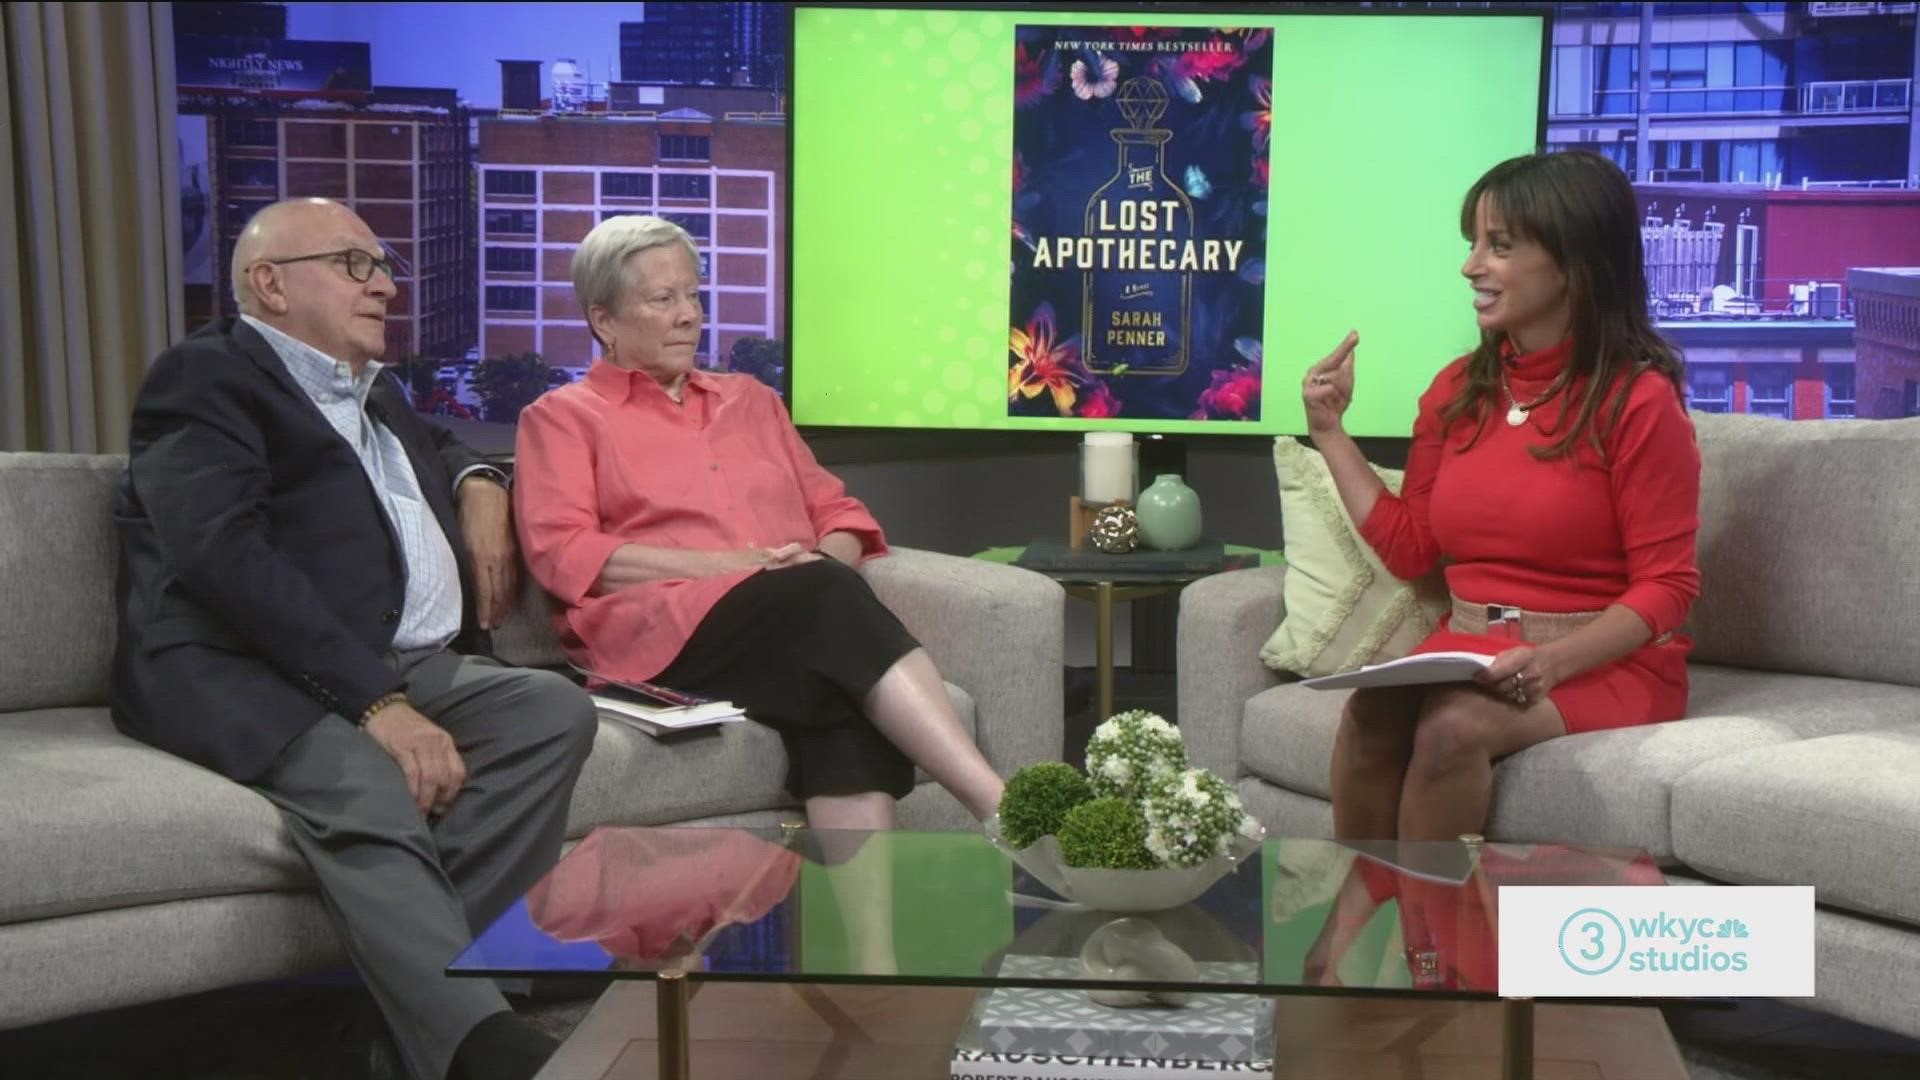 Lynn Quintrell & Ed Alix from Appletree Books speak with Hollie about this month's book selection, "The Lost Apothecary".